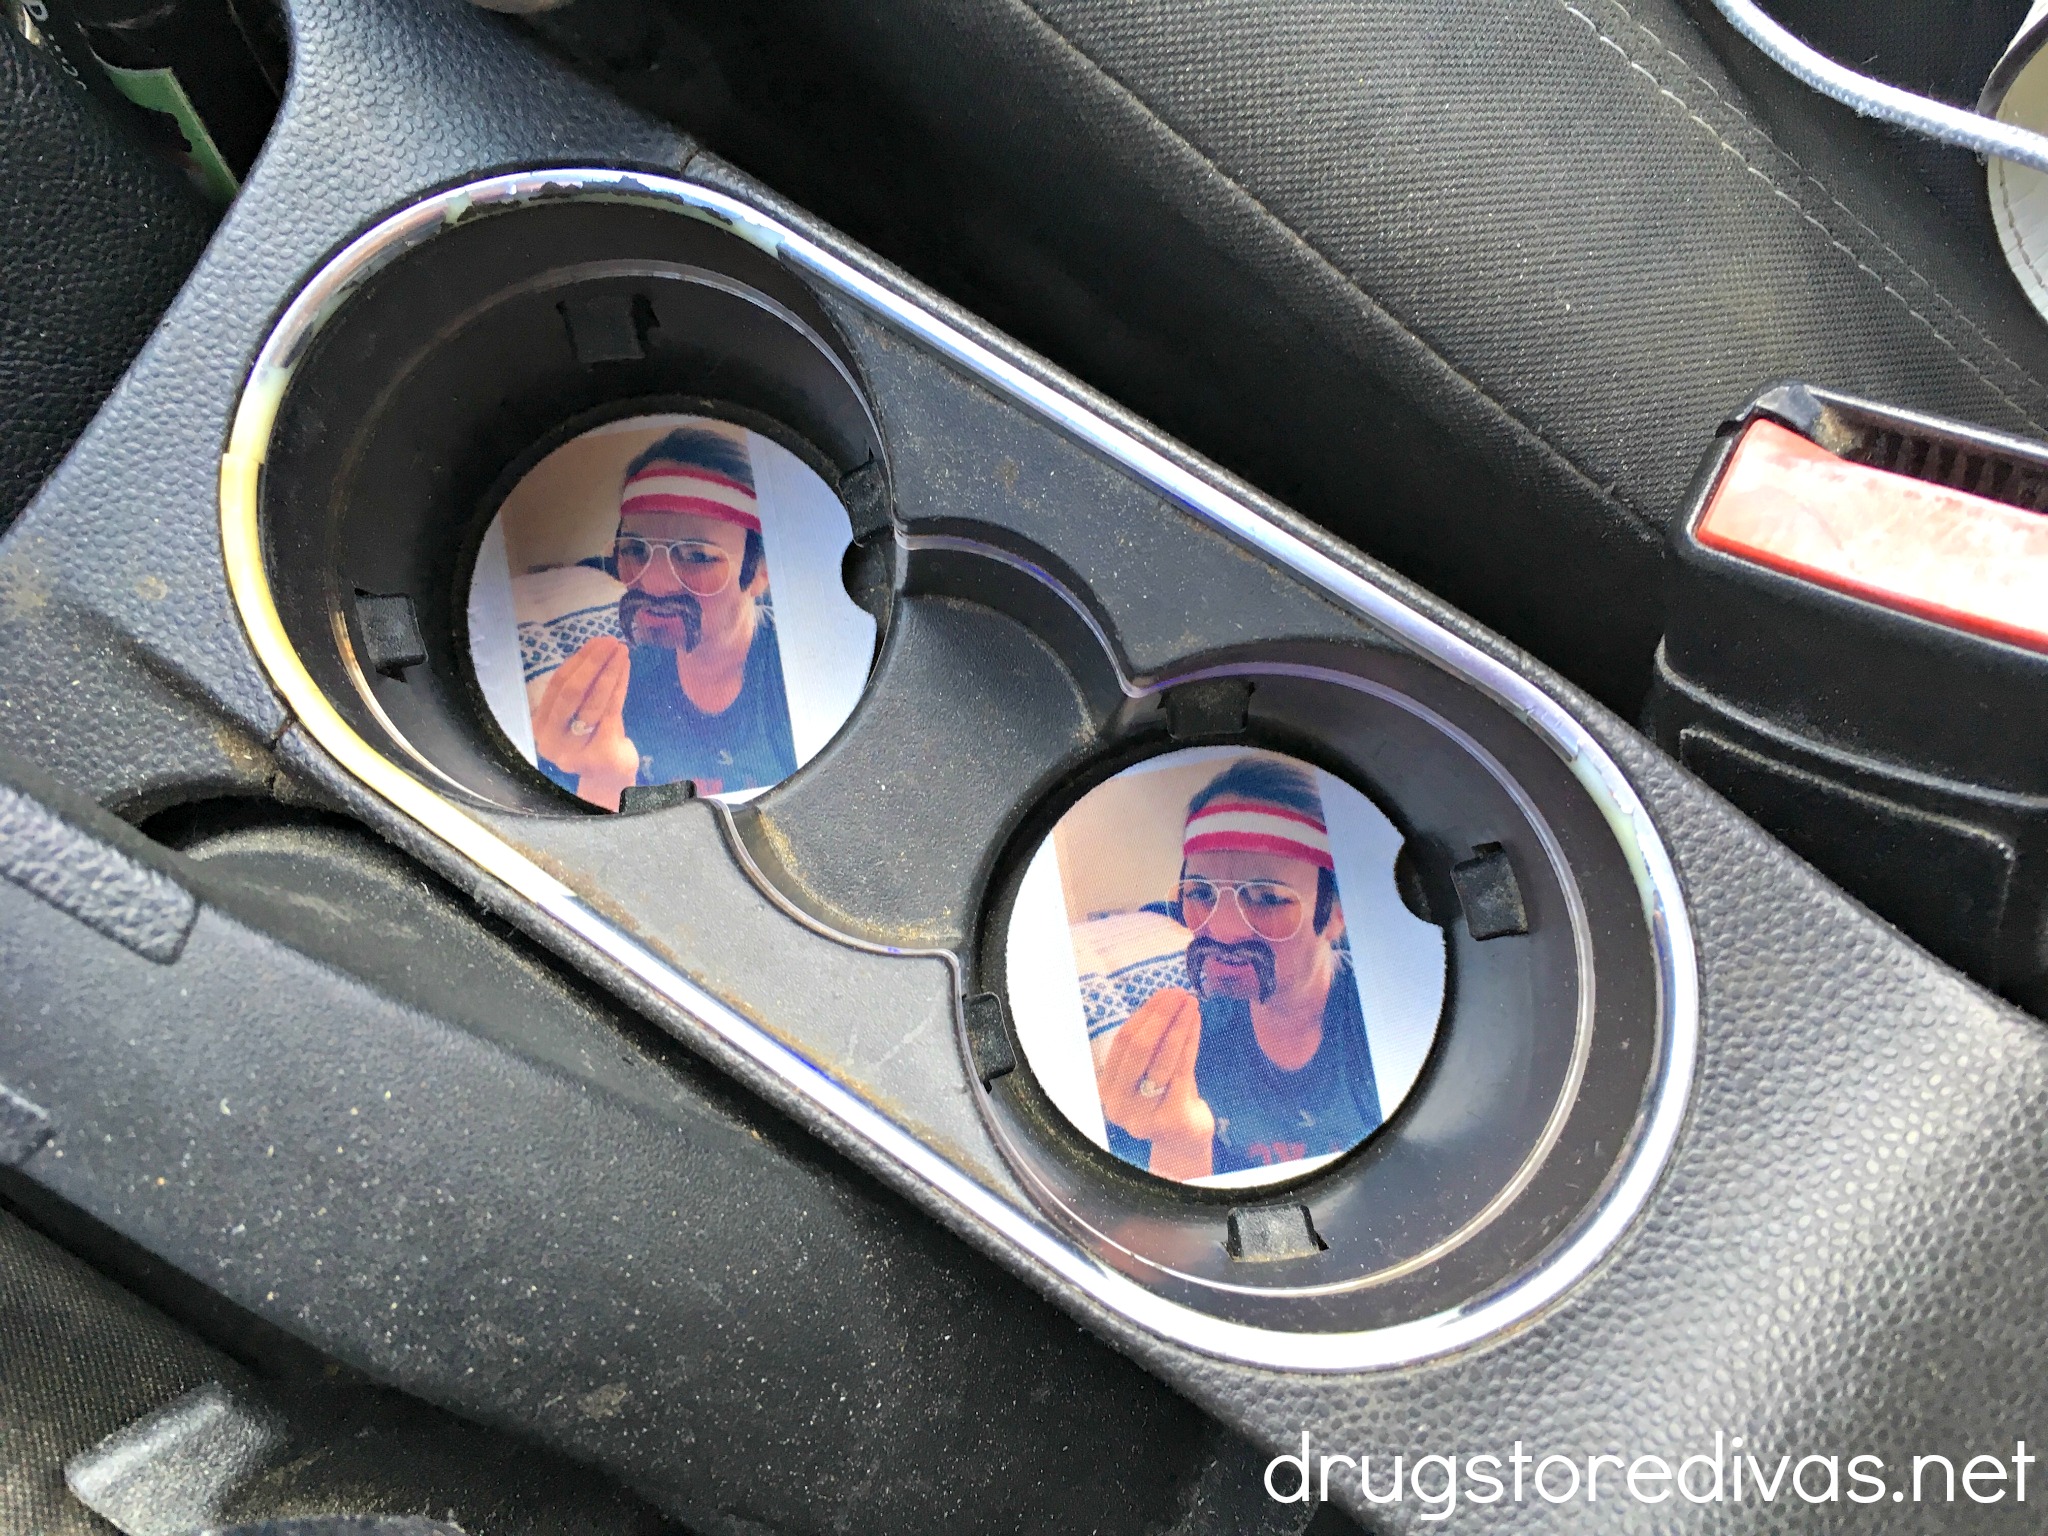 Personalized car coasters in a car.